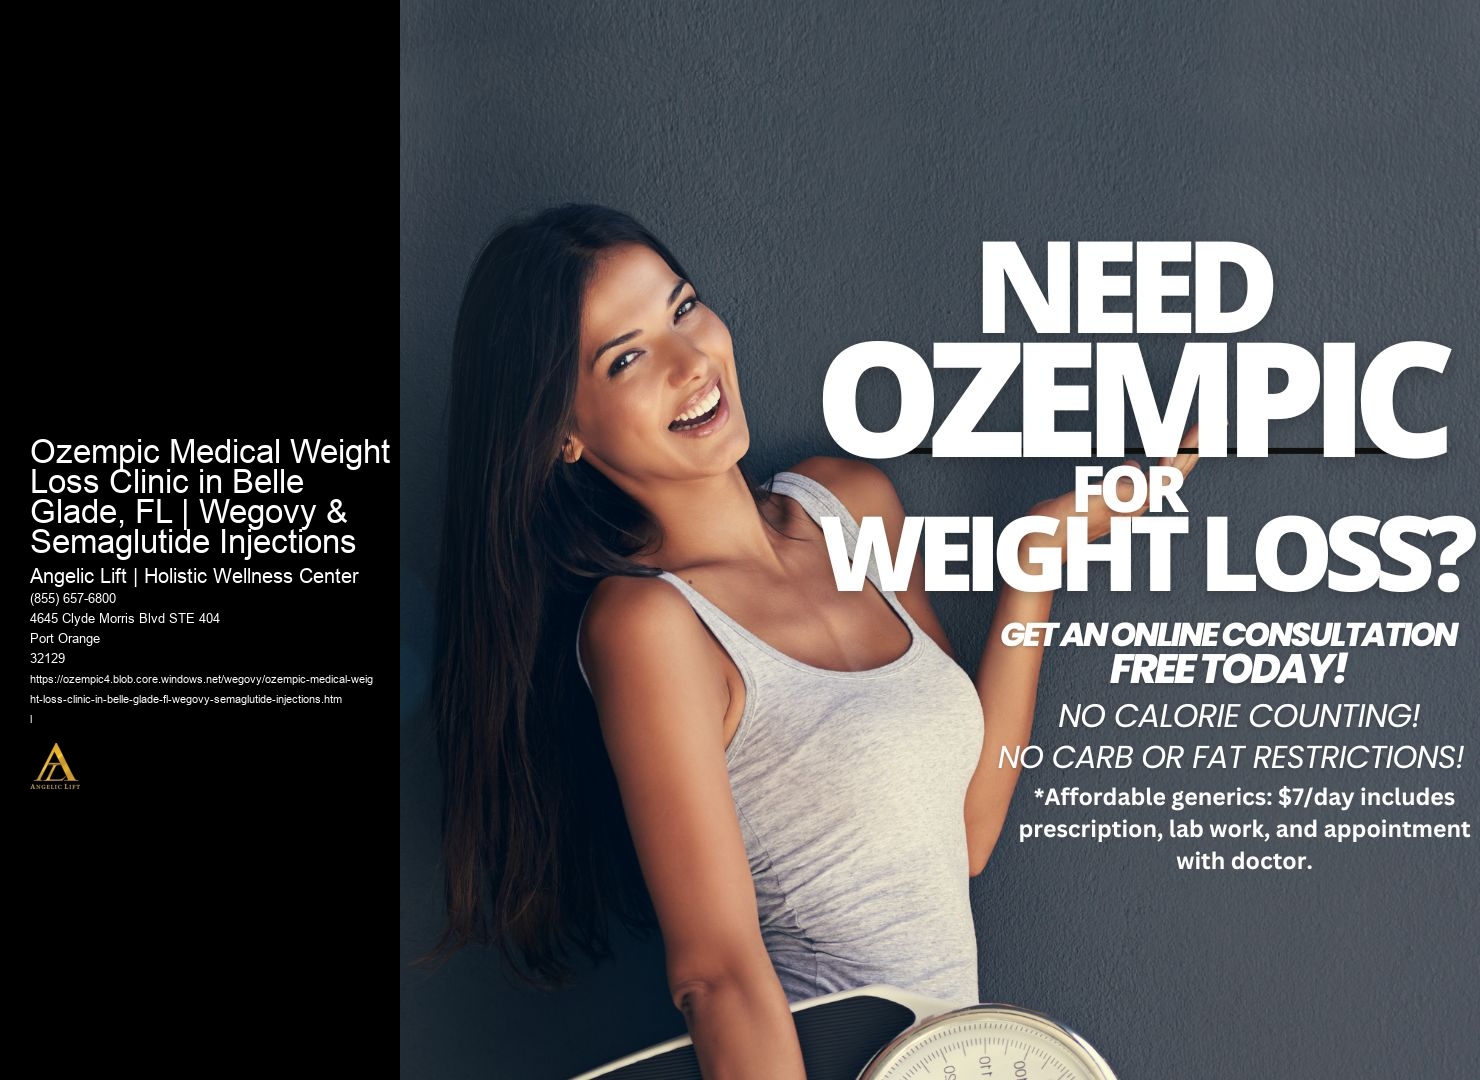 Ozempic Medical Weight Loss Clinic in Belle Glade, FL | Wegovy & Semaglutide Injections